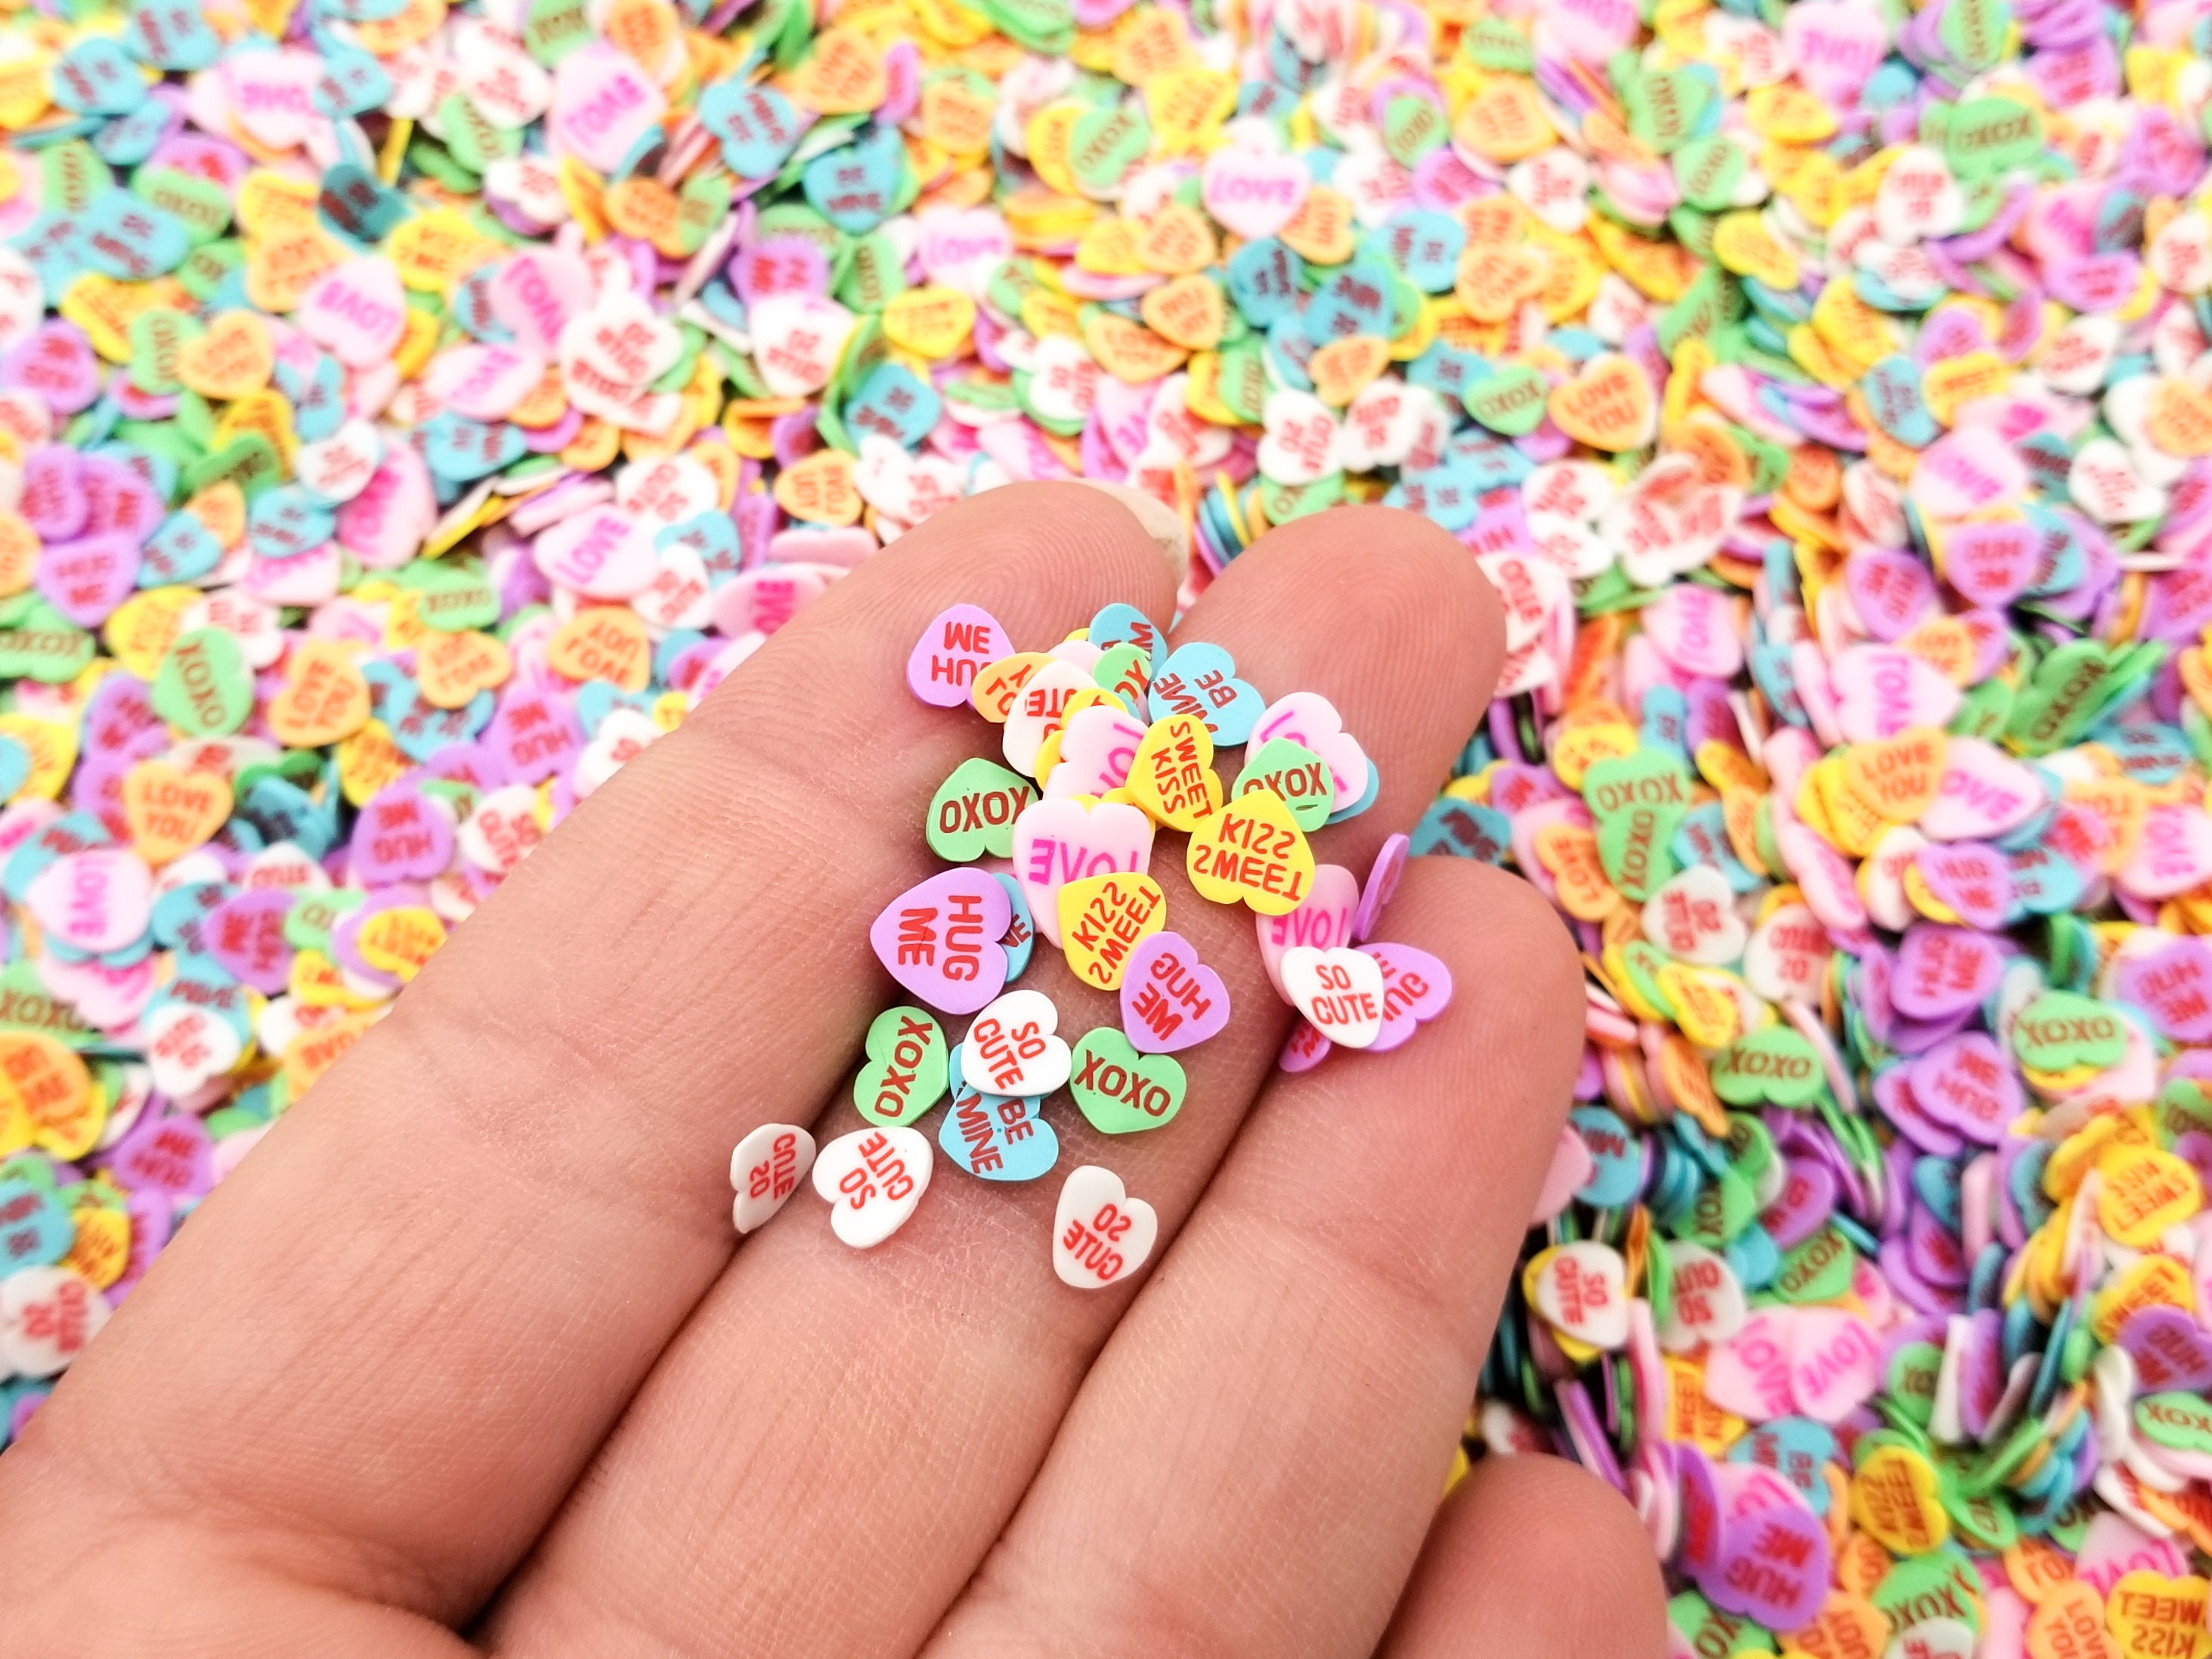 Valentine's Day Nail Art, Heart Fimo Cane Slices, Polymer Clay Cane, MiniatureSweet, Kawaii Resin Crafts, Decoden Cabochons Supplies